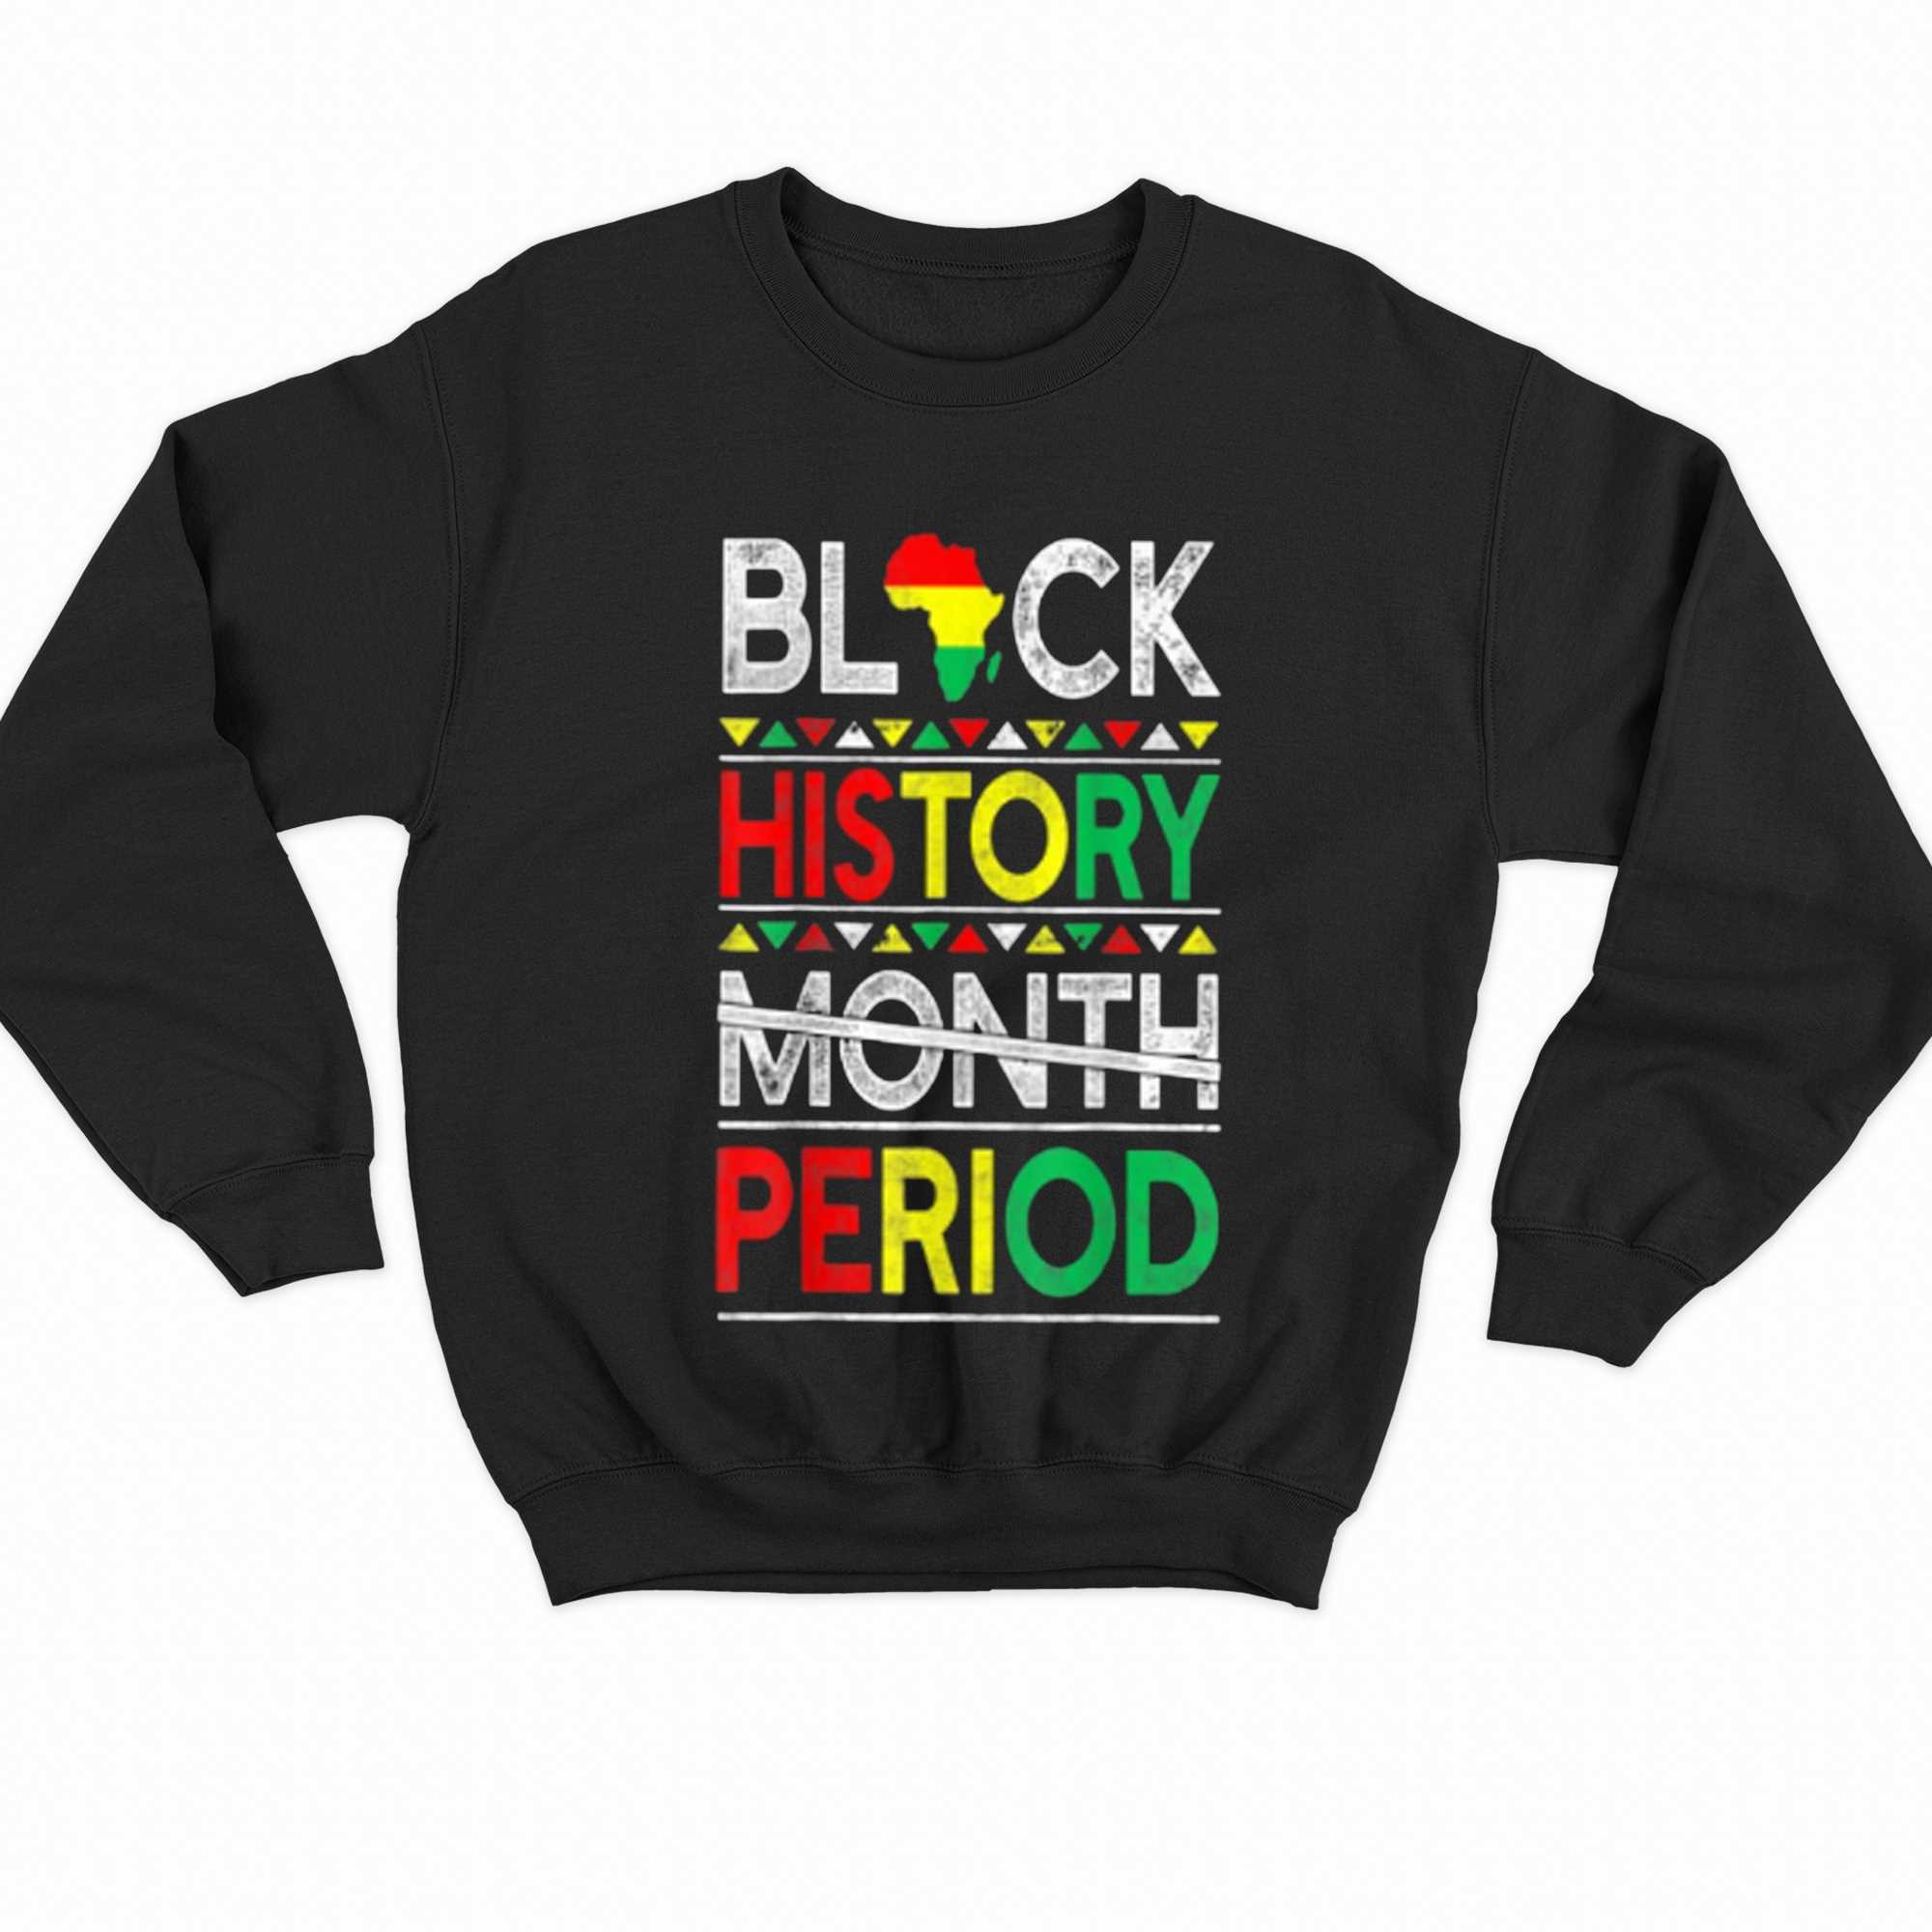 Black History Month Period T-shirt 